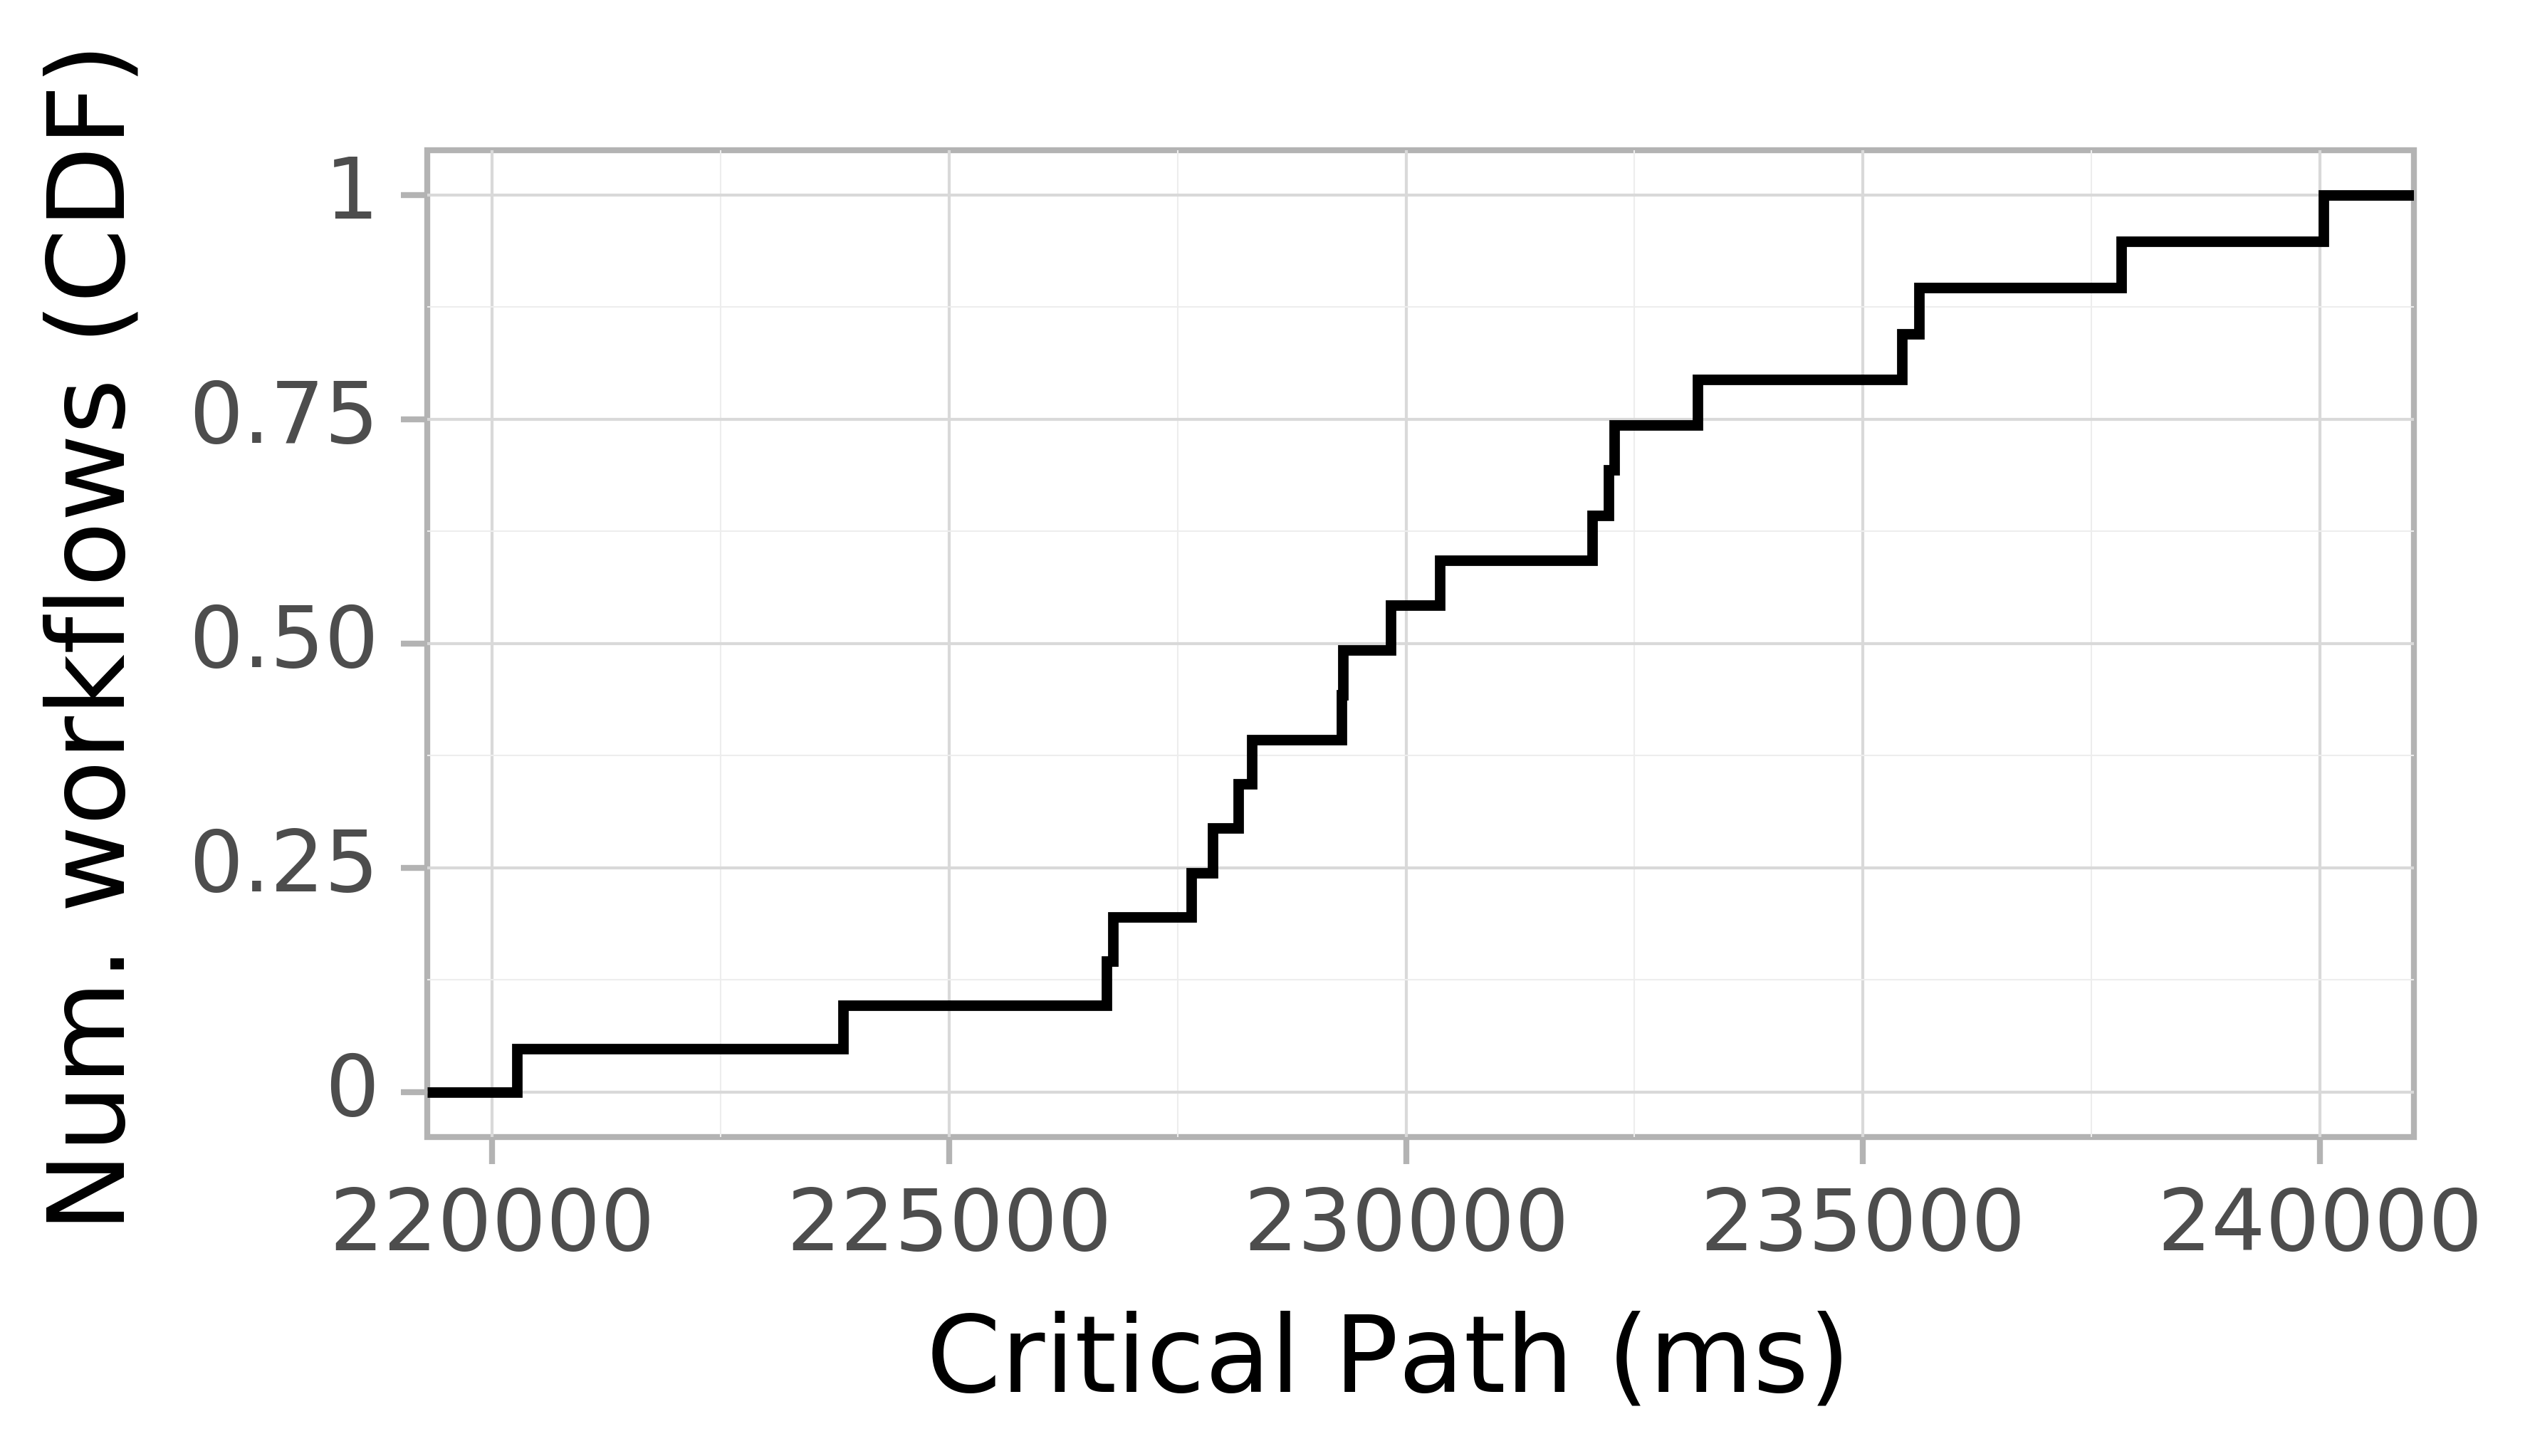 Job runtime CDF graph for the askalon-new_ee58 trace.